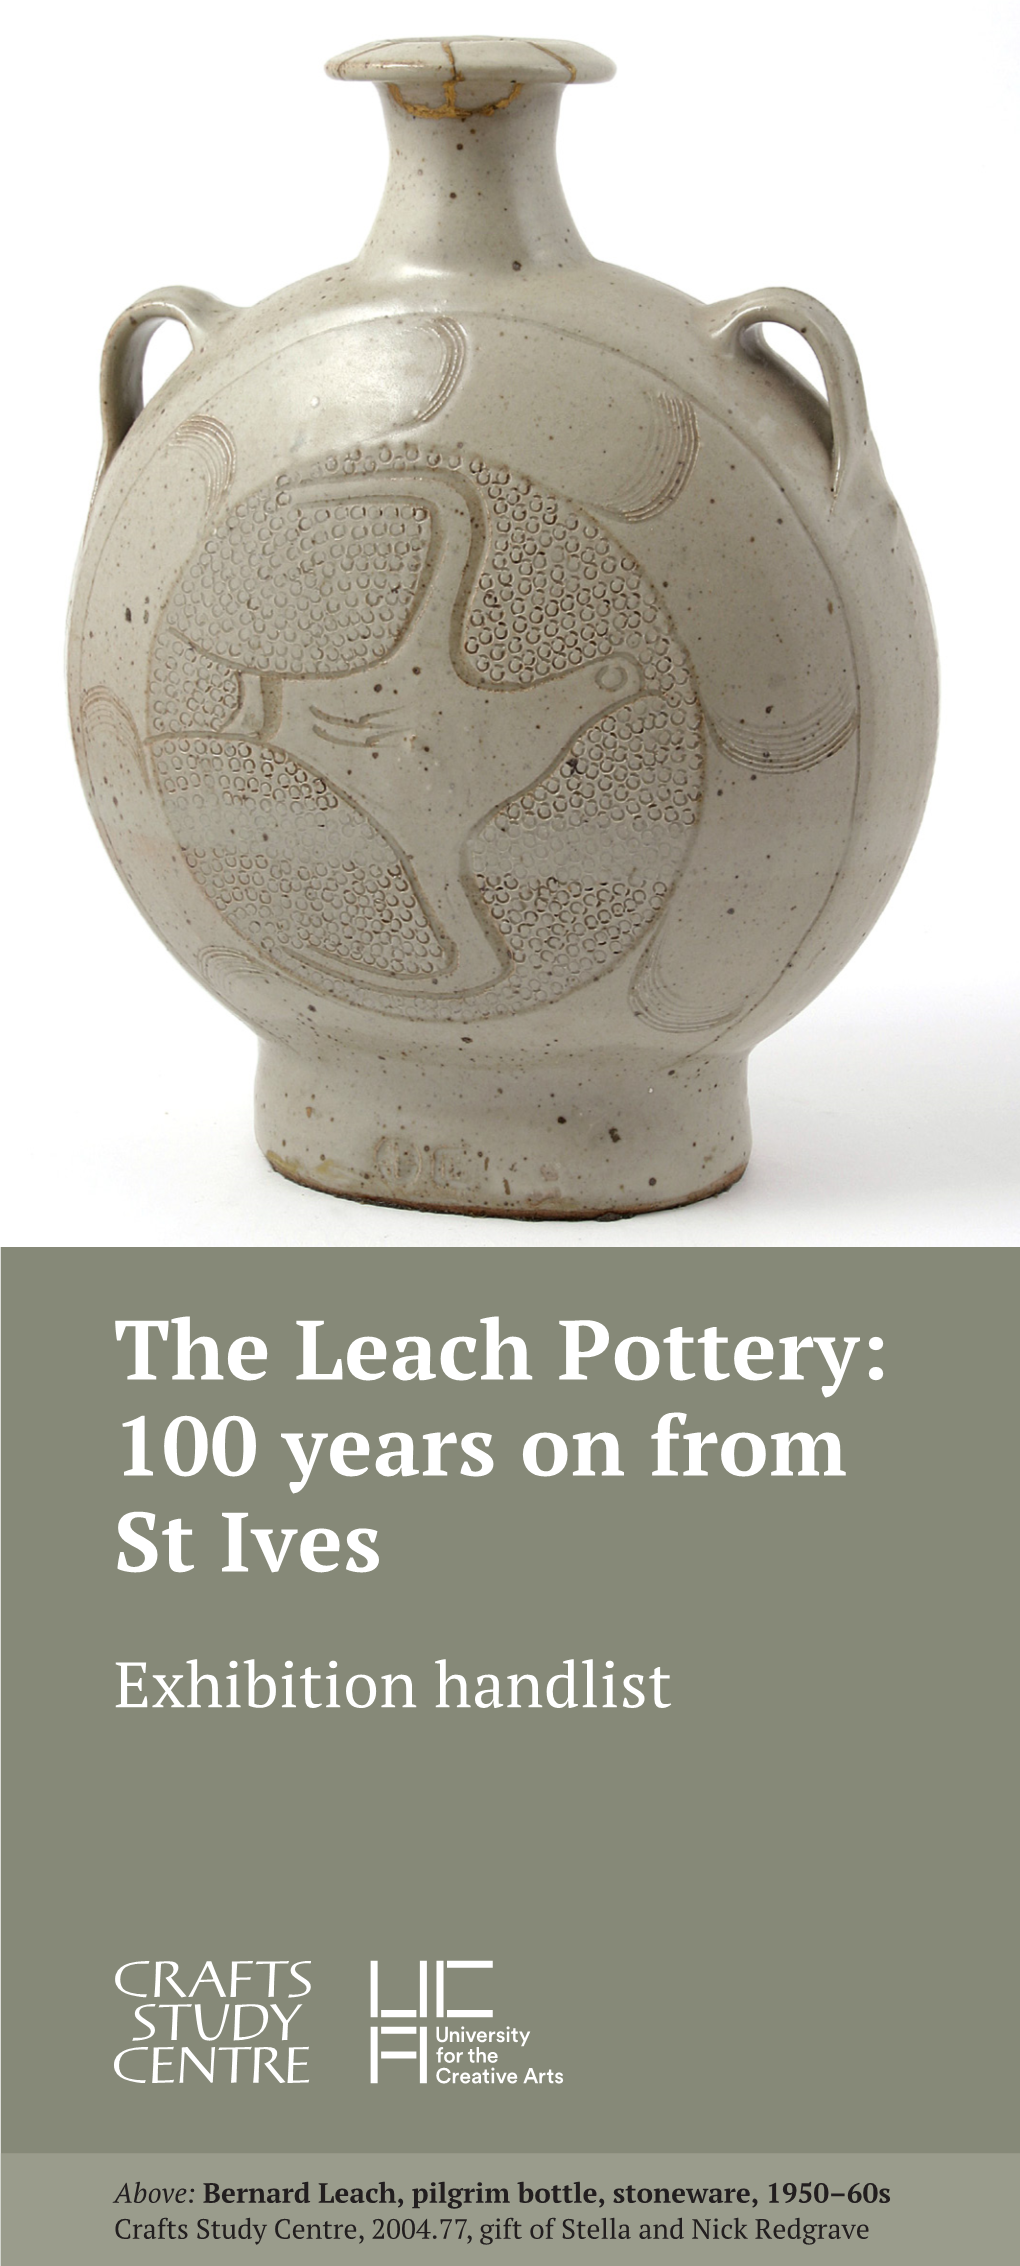 The Leach Pottery: 100 Years on from St Ives